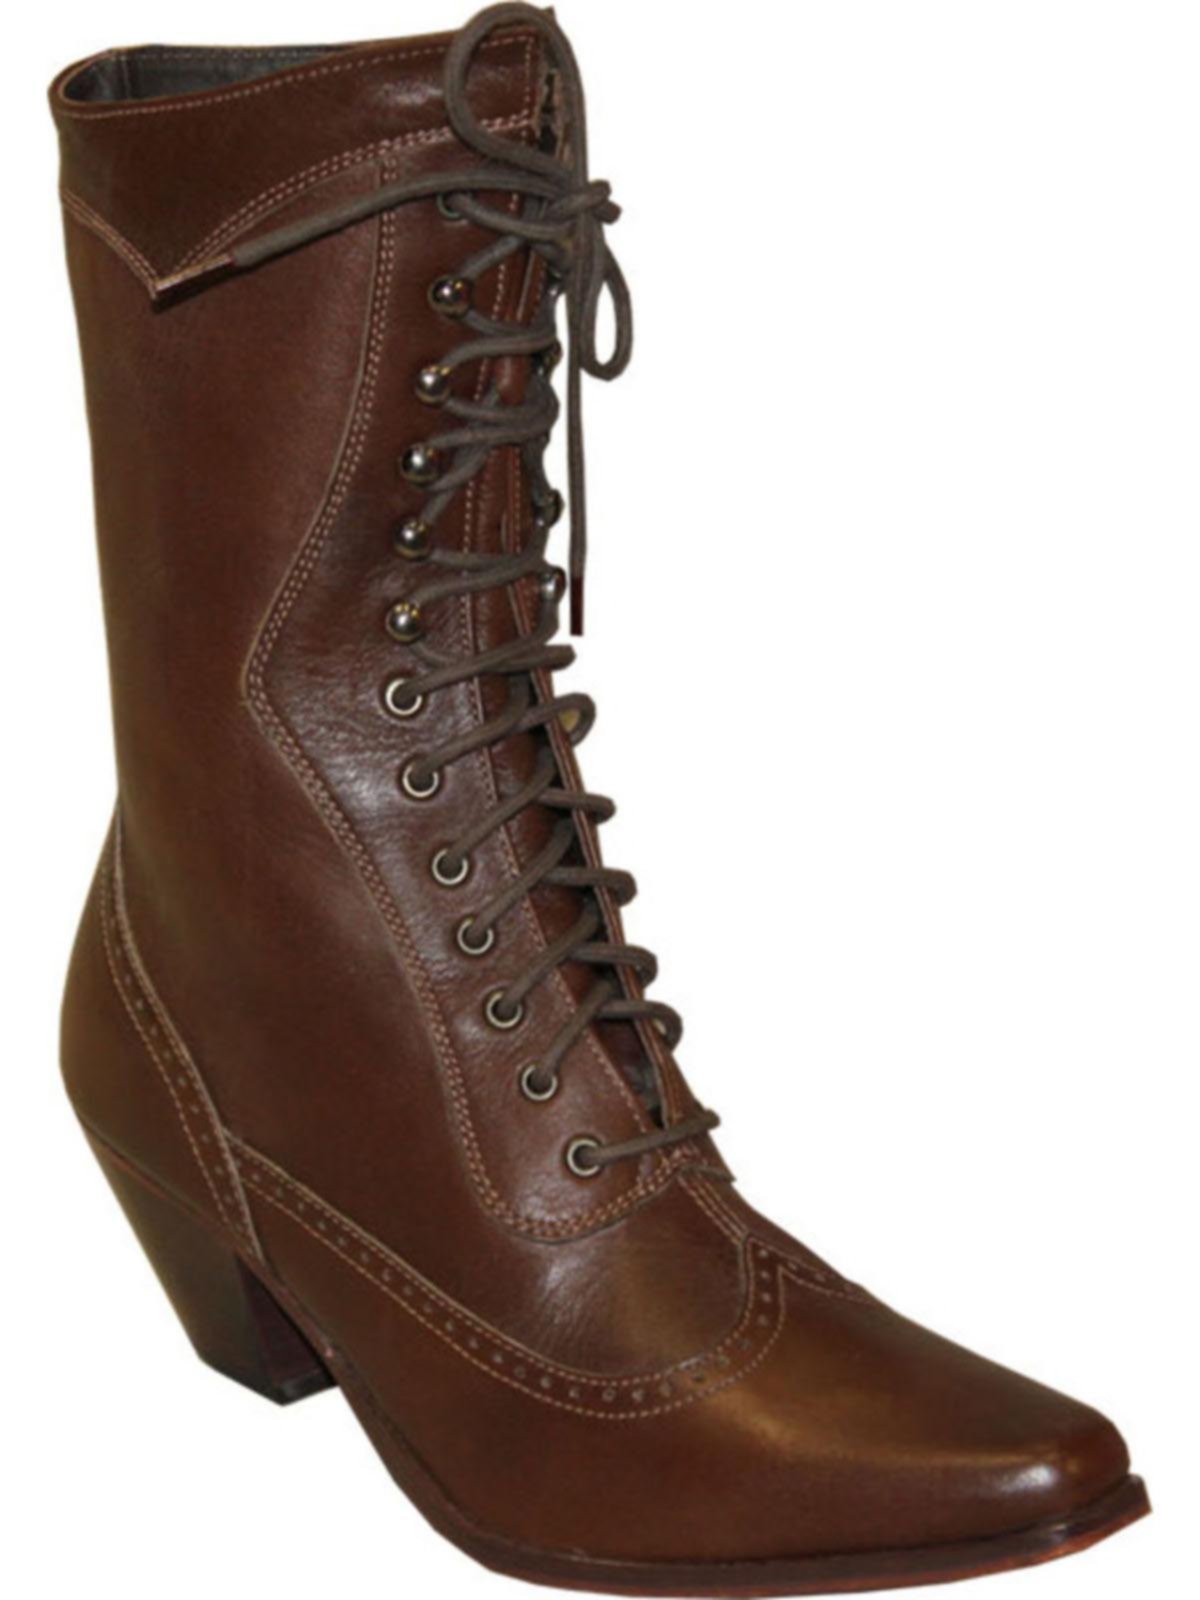 Buy > brown victorian boots > in stock